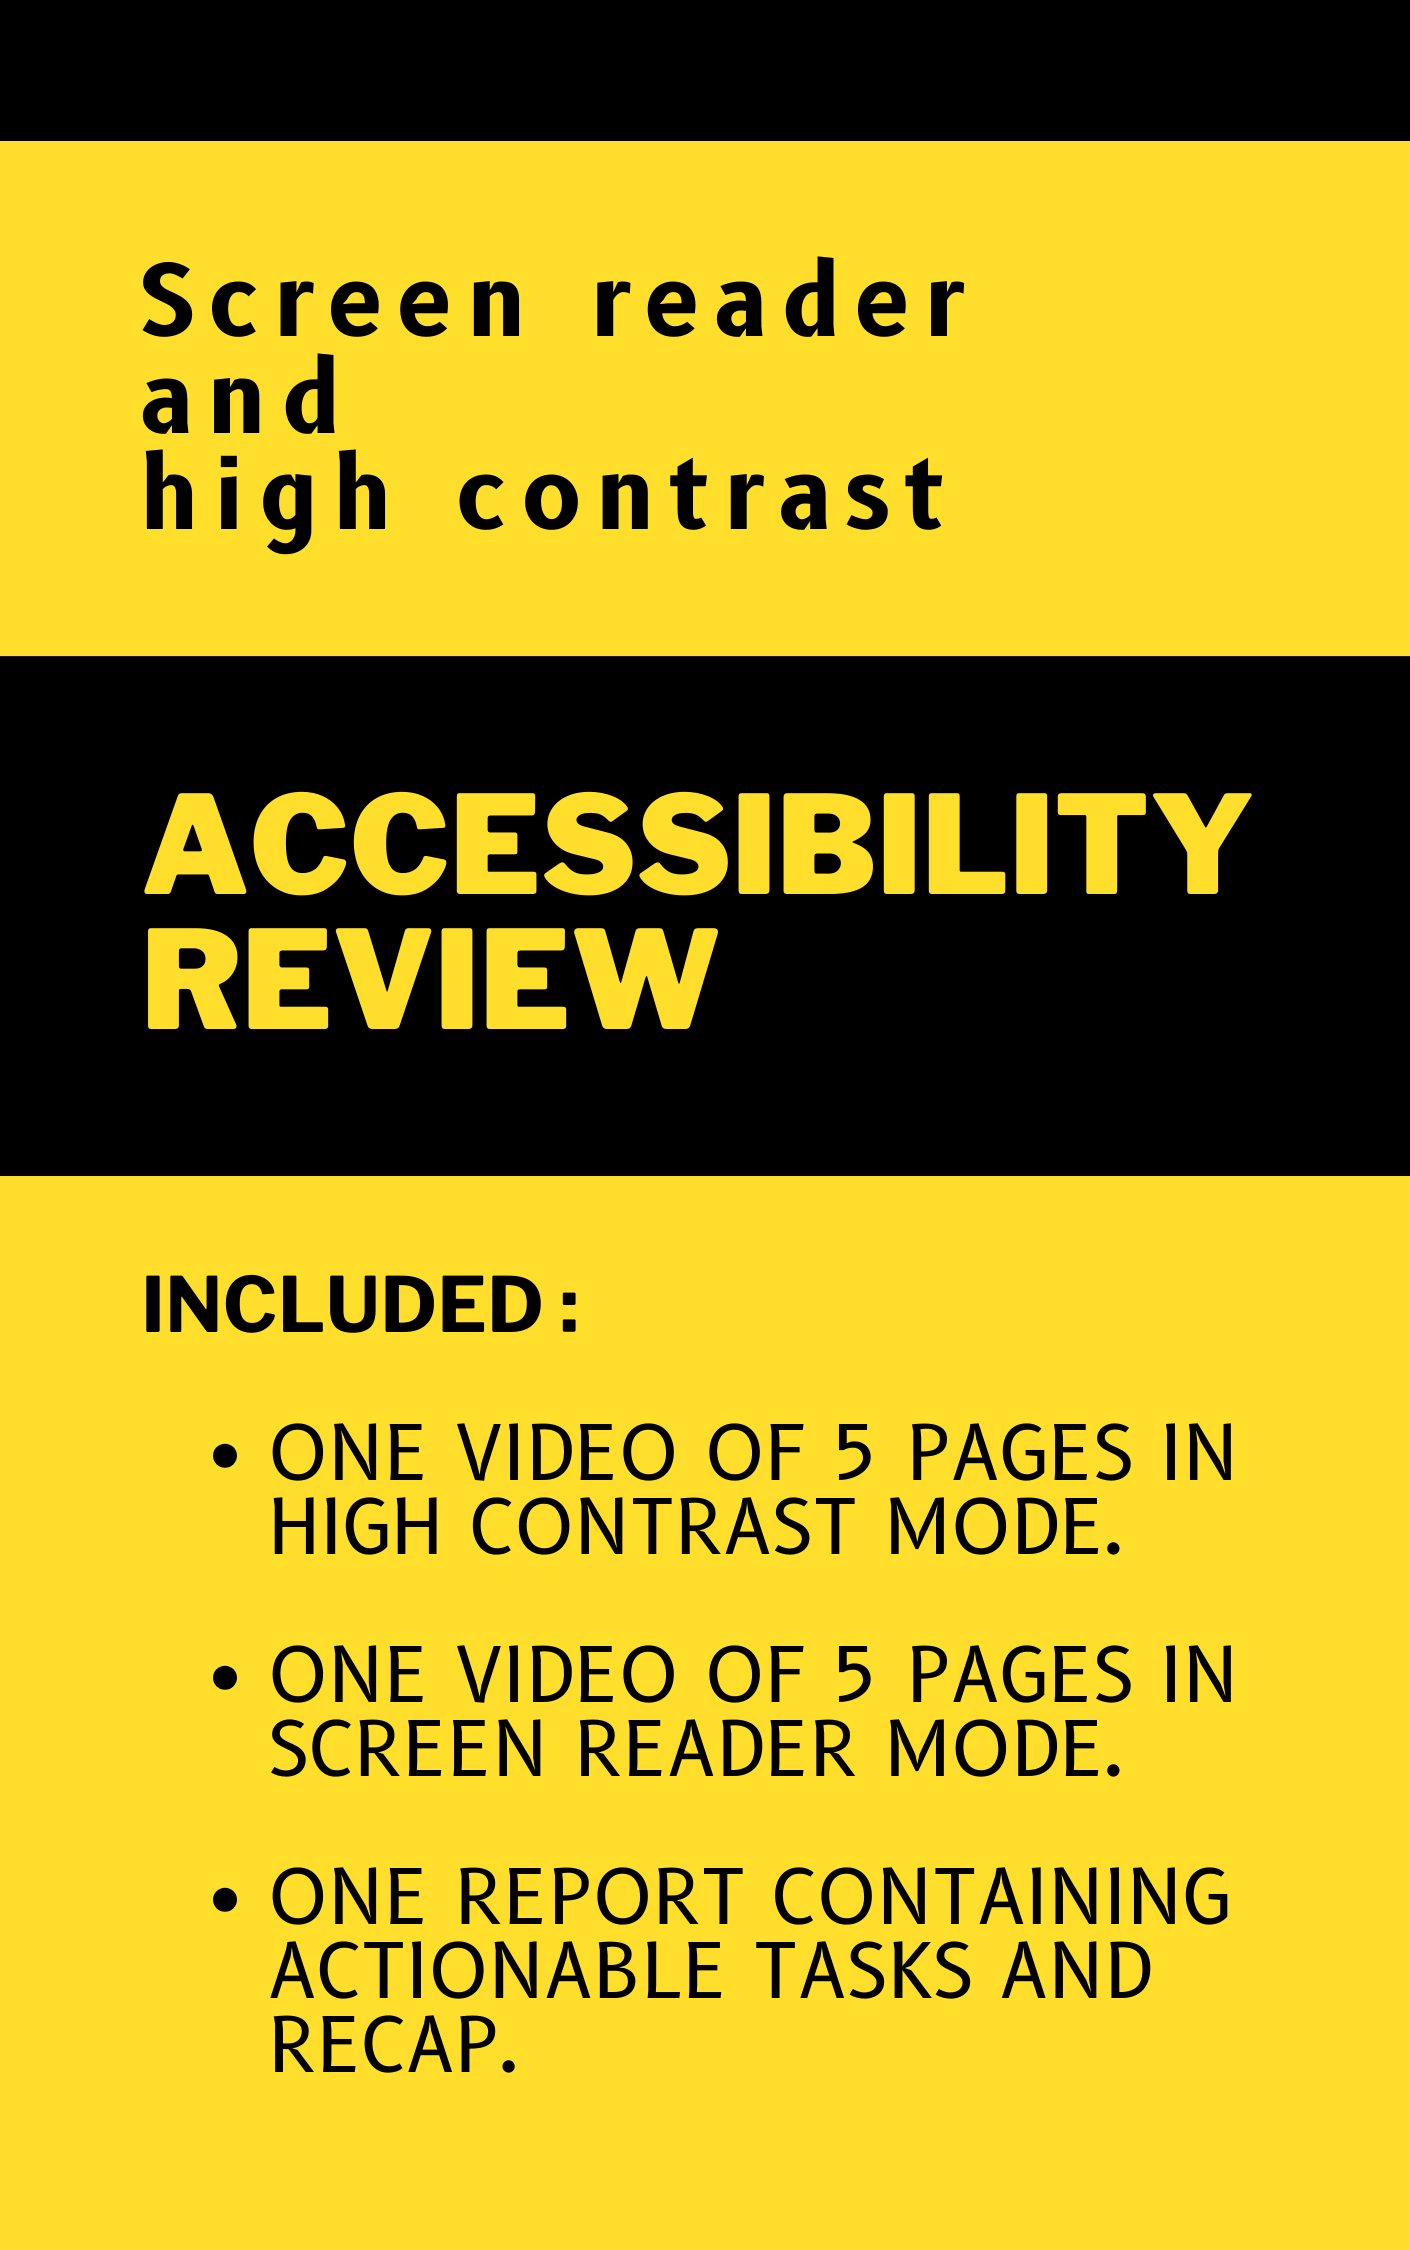 Website / web app accessibility review